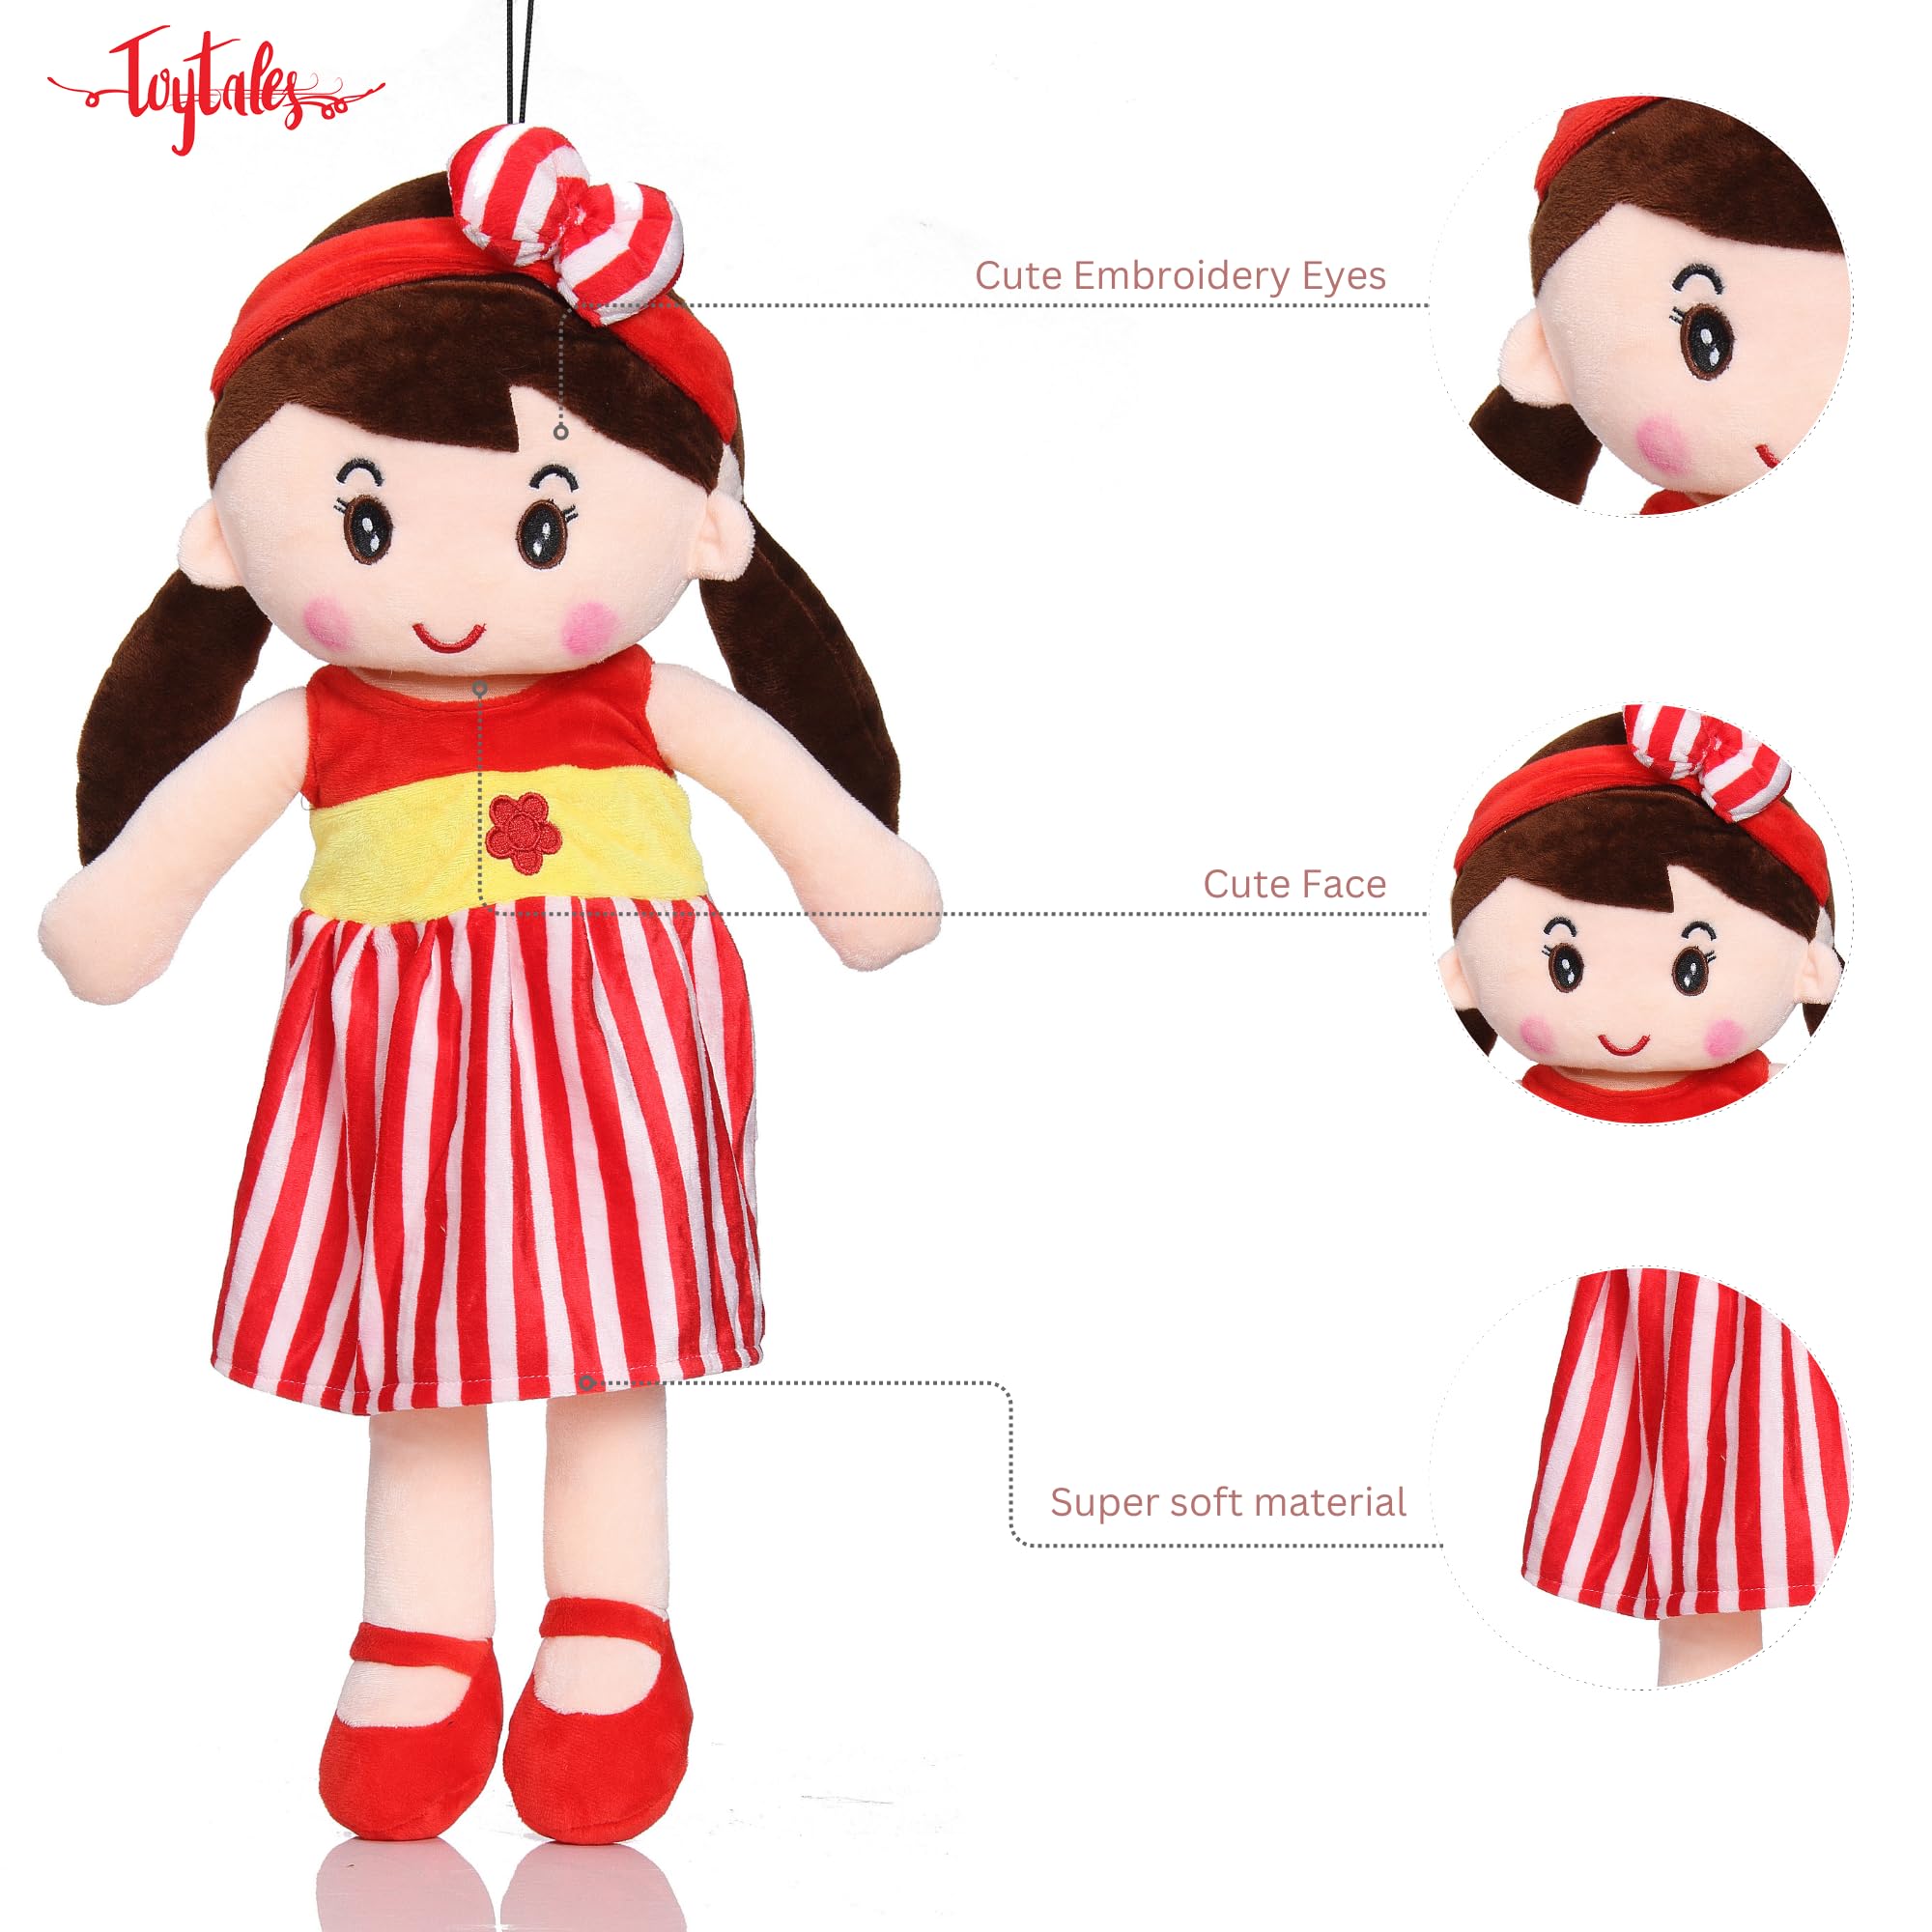 Cute Super Soft Stuffed Doll Big Size 80cm, Cuddly Squishy Dolls, Plush Toy for Baby Girls, Spark Imaginative Play, Safe & Fun Gift for Kids, Perfect for Playtime & Cuddling (Red)